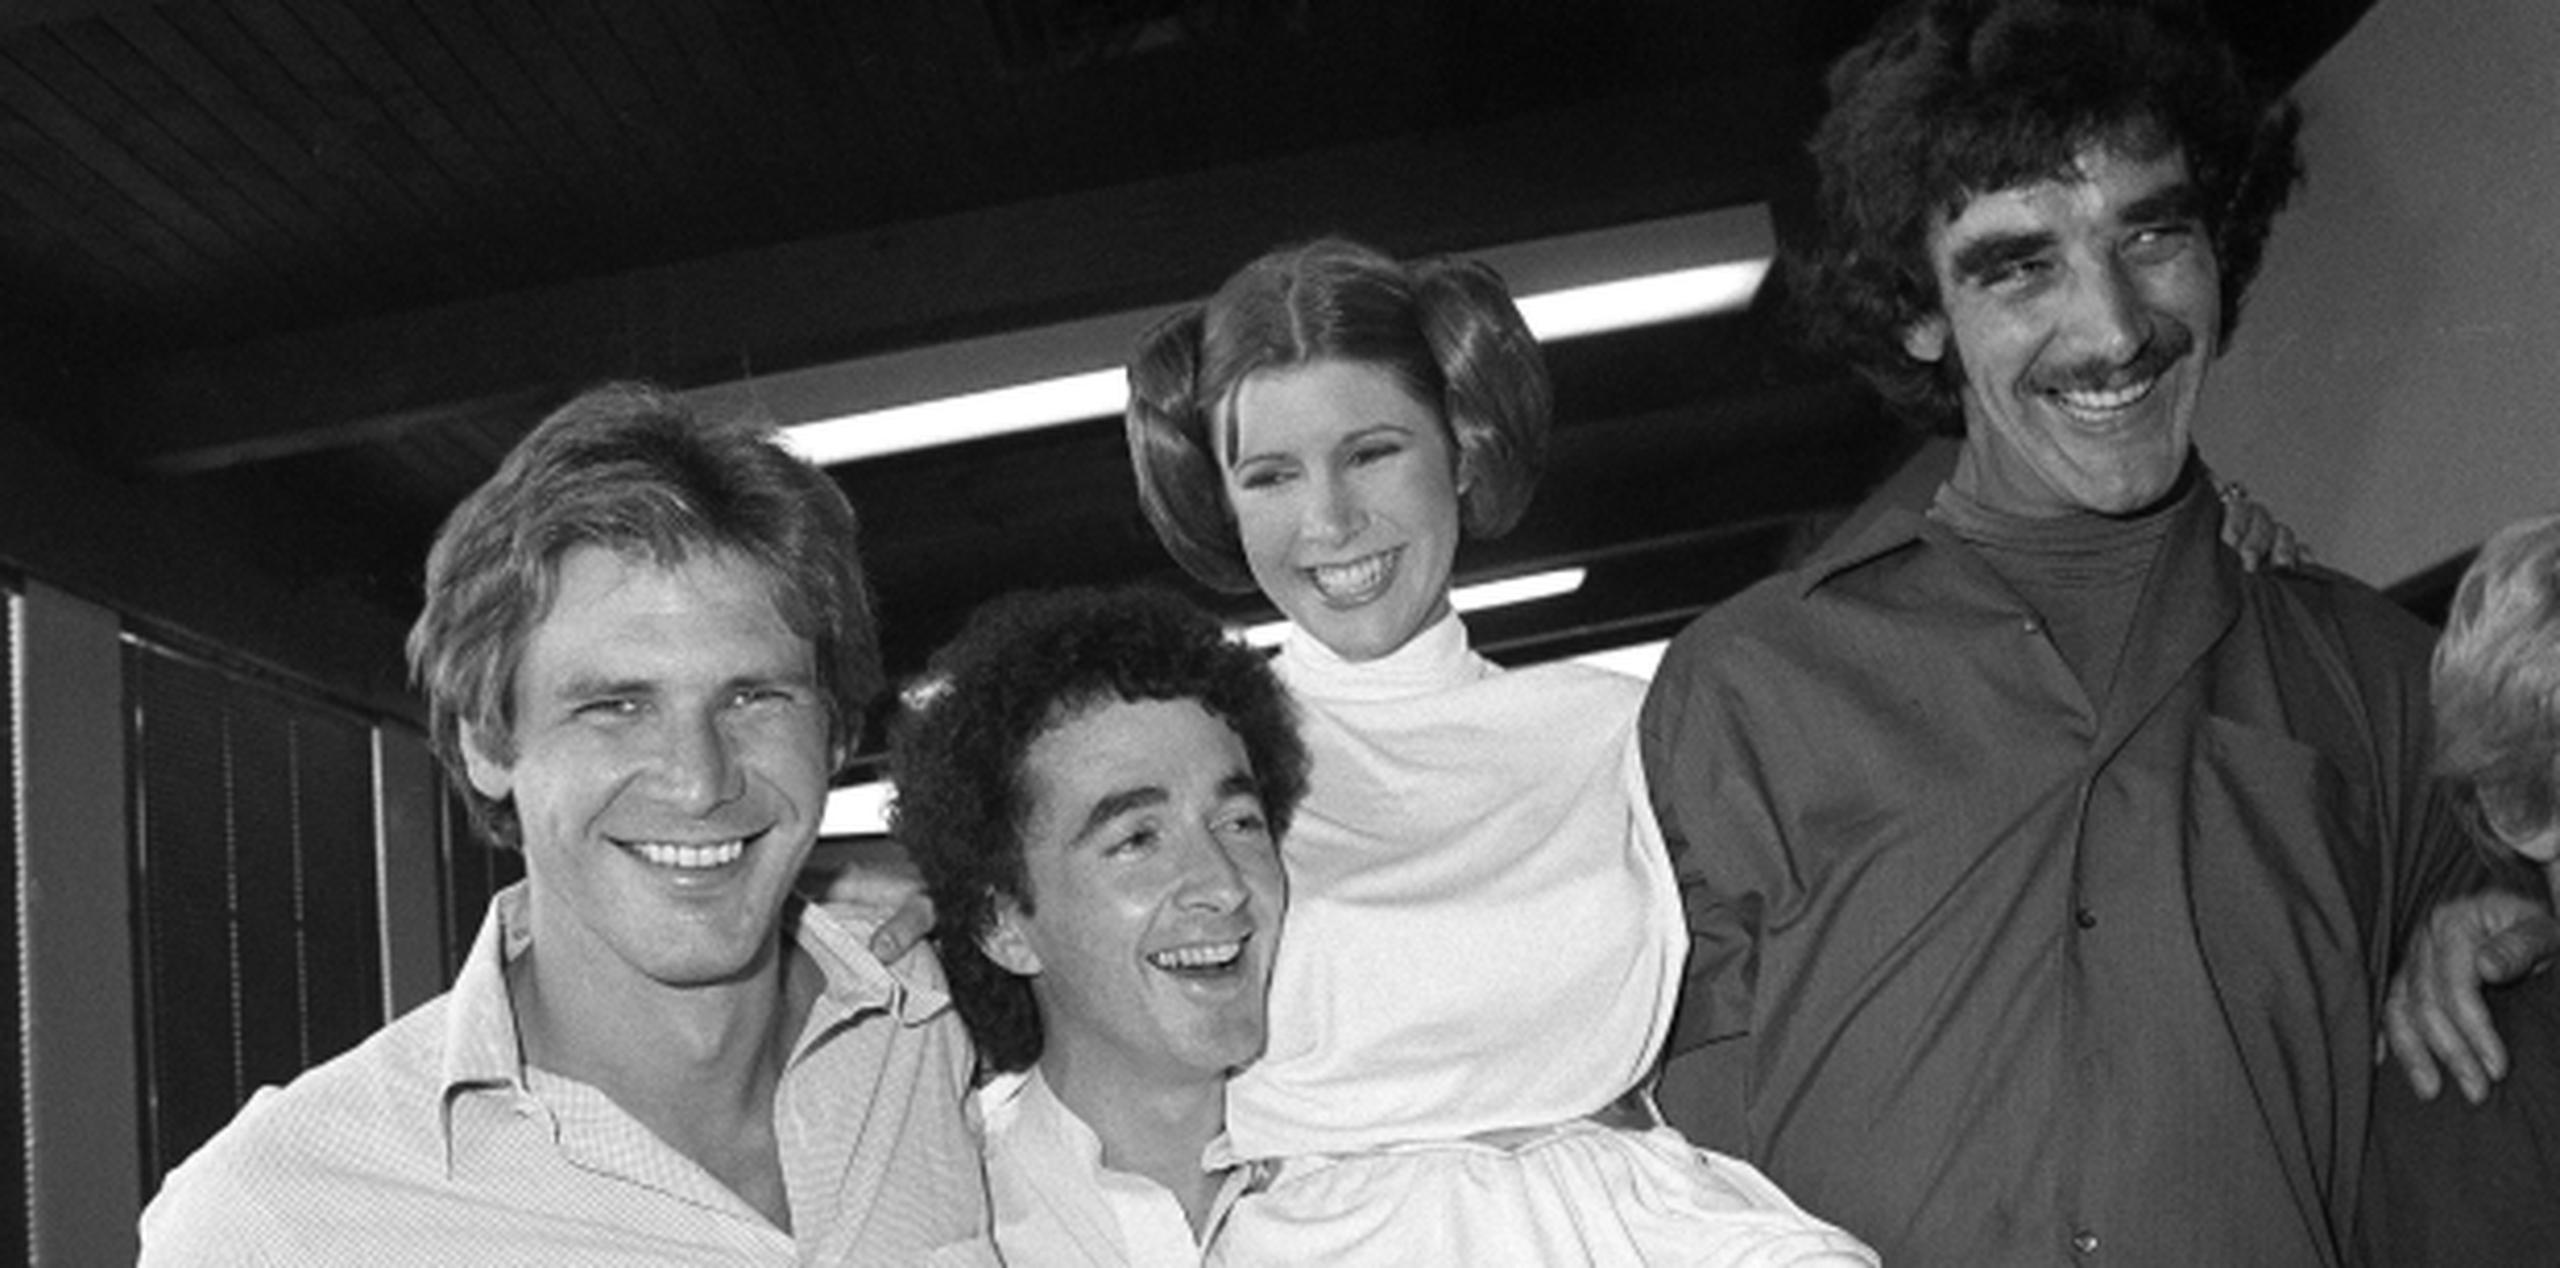 Harrison Ford (Han Solo), Anthony Daniels (C-3P0), Carrie Fisher (Princesa Leia) y Peter Mayhew (Chewbacca). (Archivo)